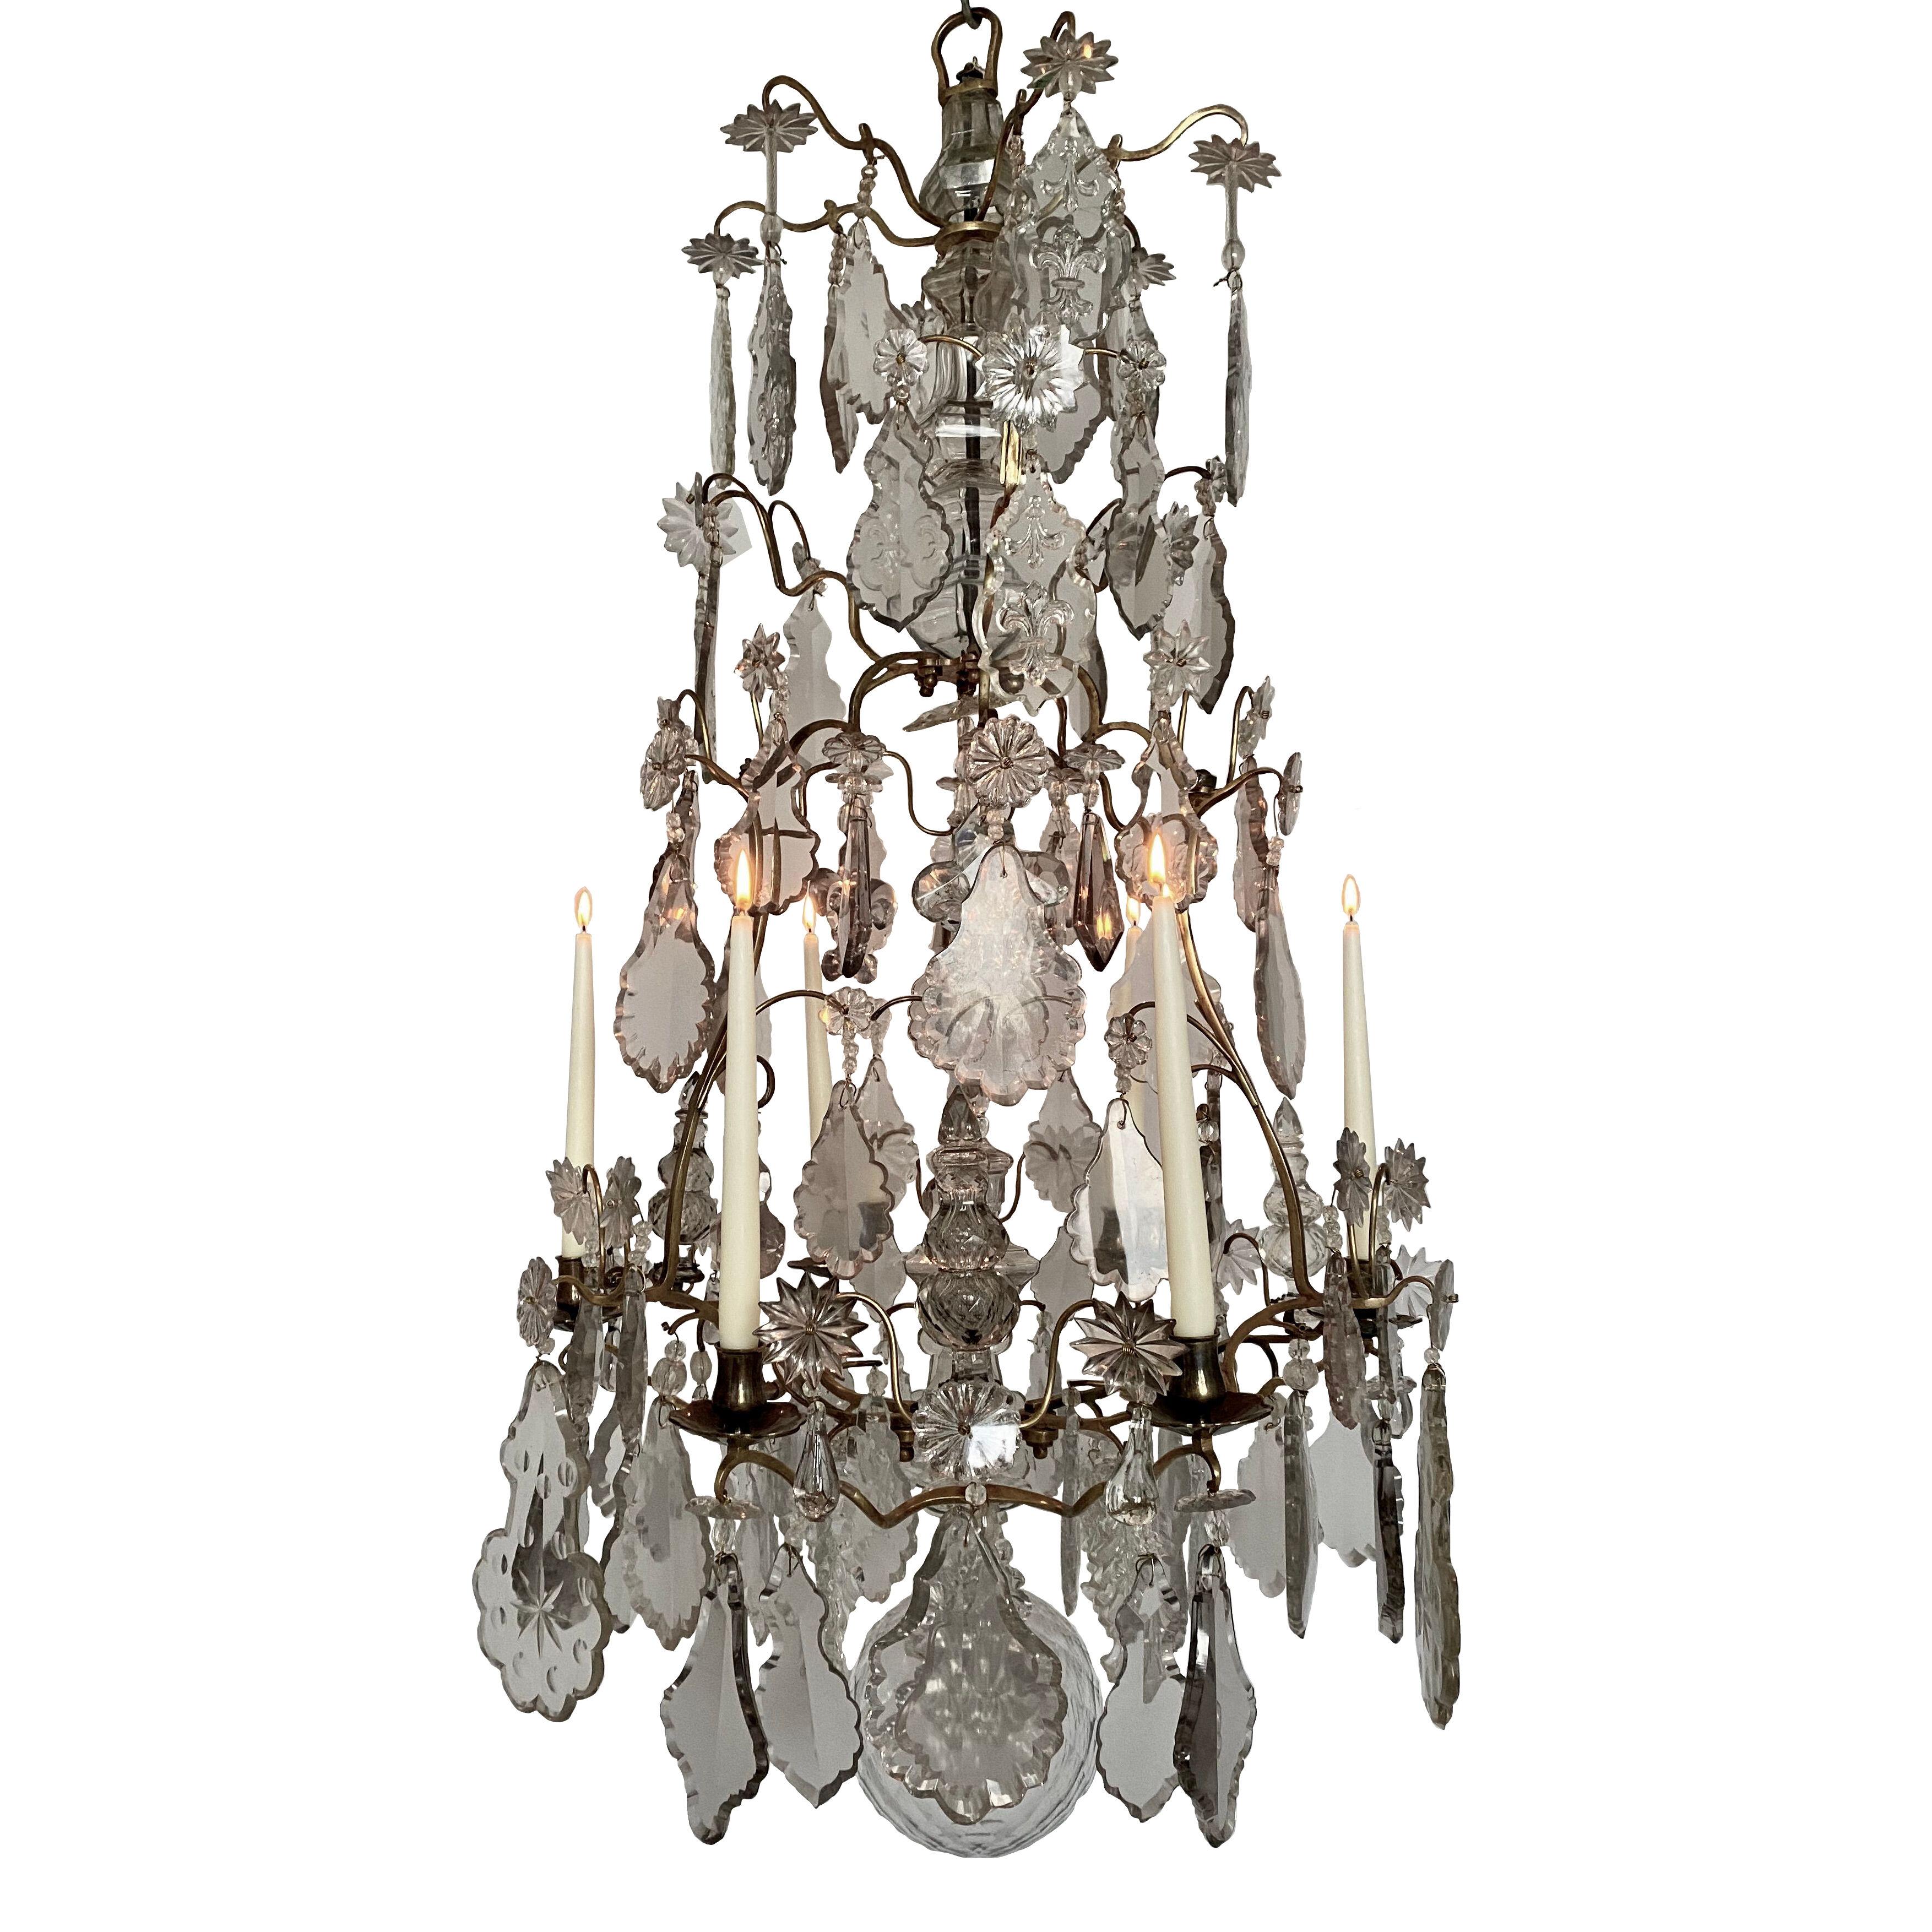 French baroque chandelier, mid 18th c